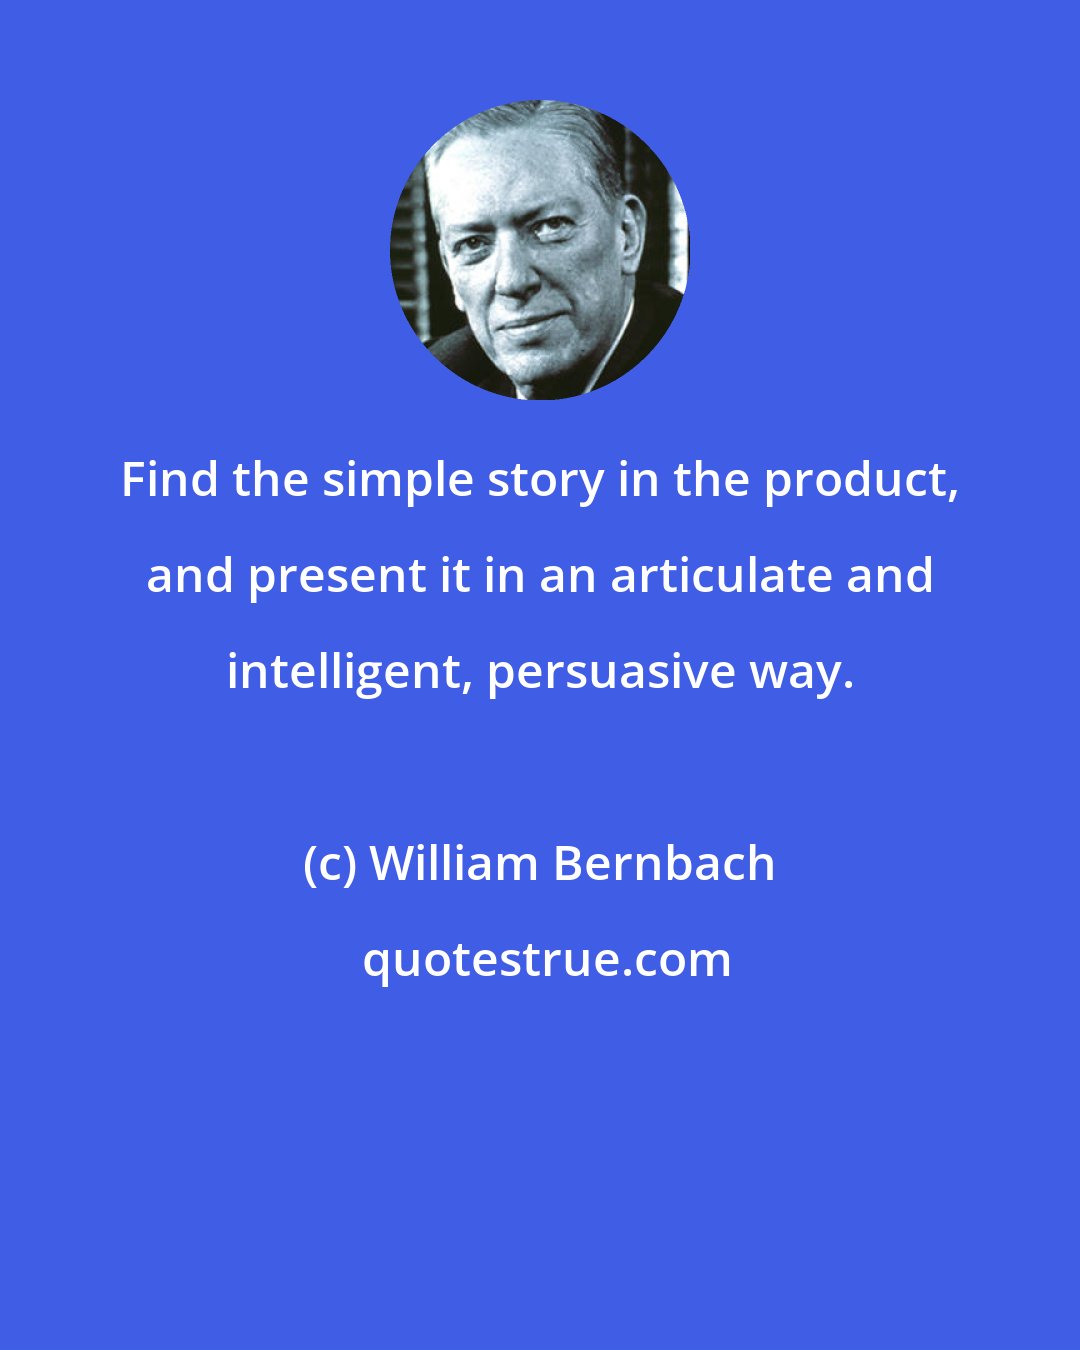 William Bernbach: Find the simple story in the product, and present it in an articulate and intelligent, persuasive way.